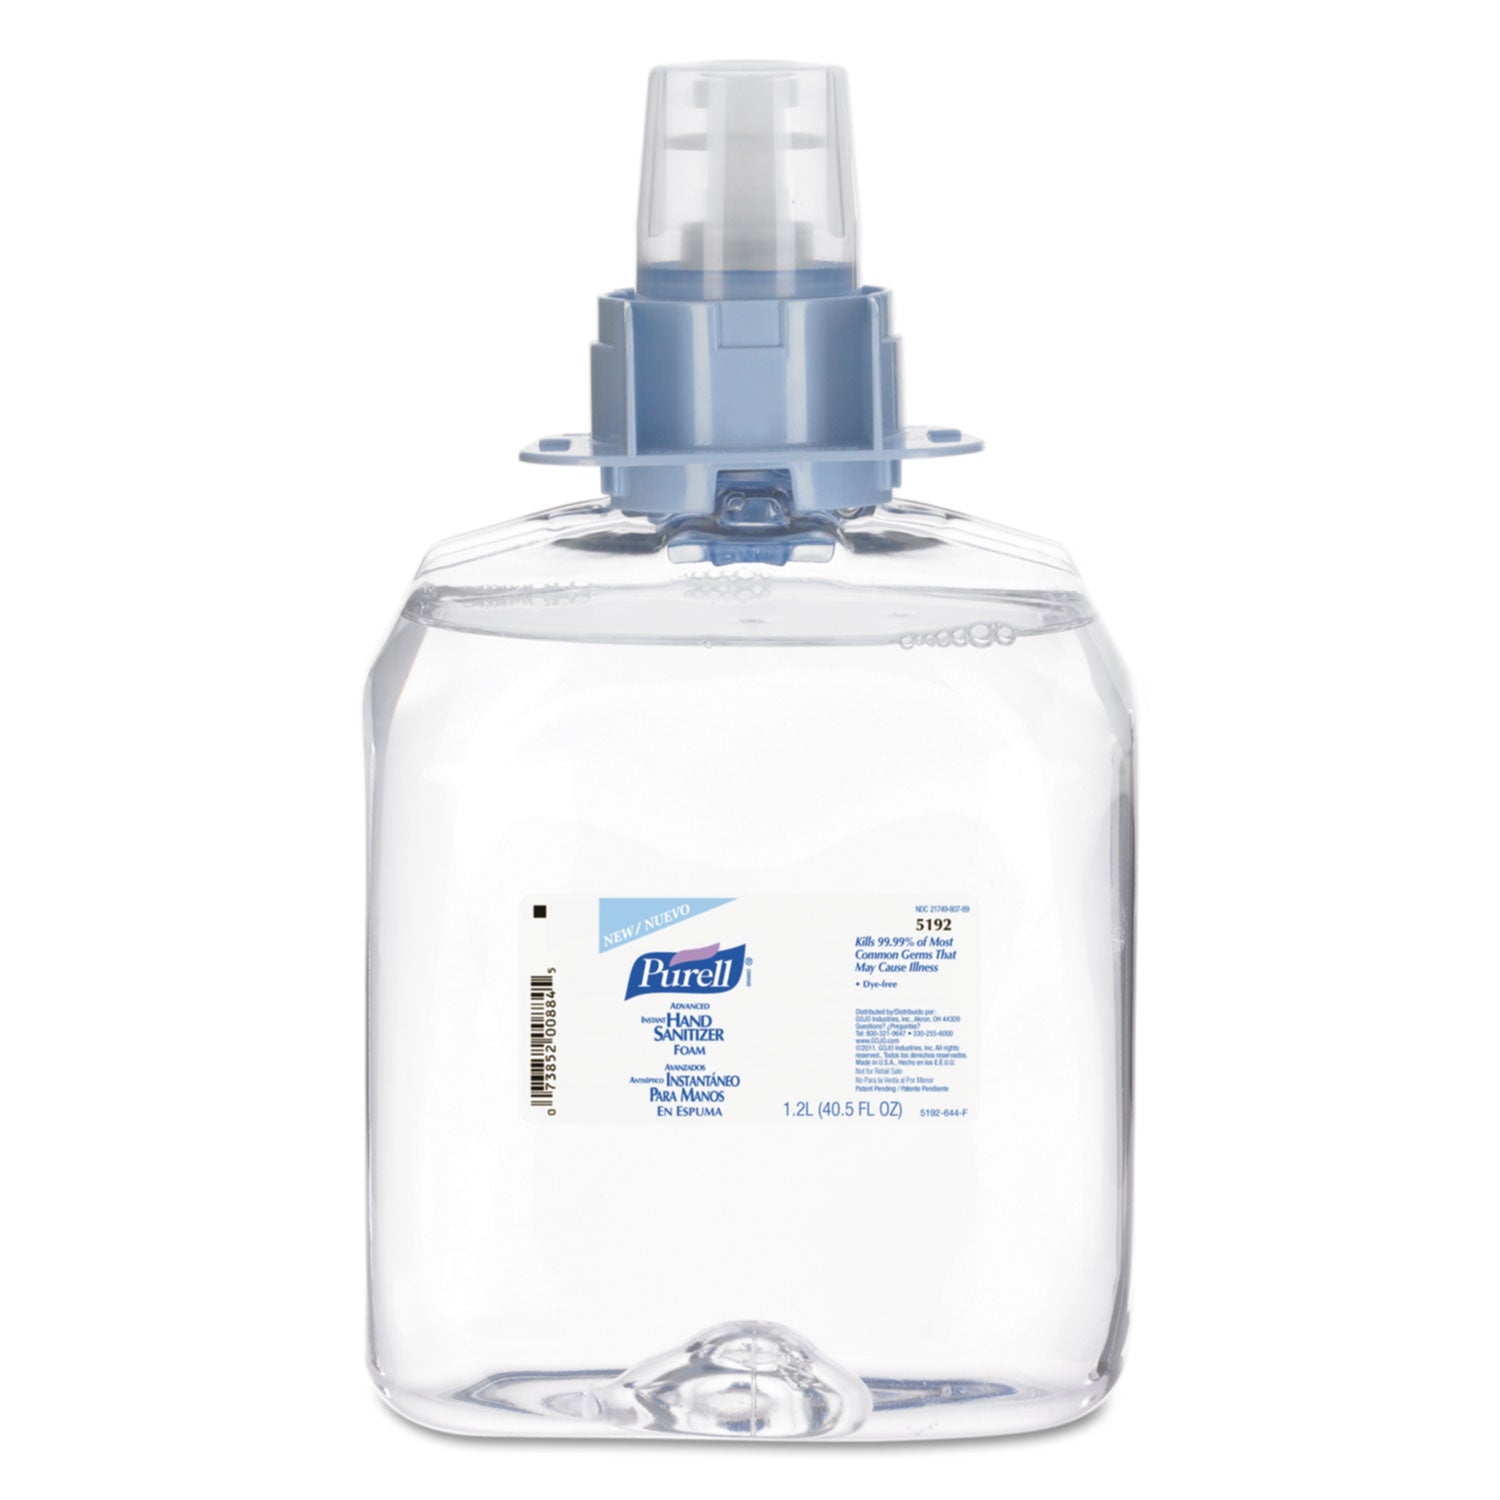 advanced-hand-sanitizer-foam-for-cs4-and-fmx-12-dispensers-1200-ml-refill-unscented_goj519204ea - 1